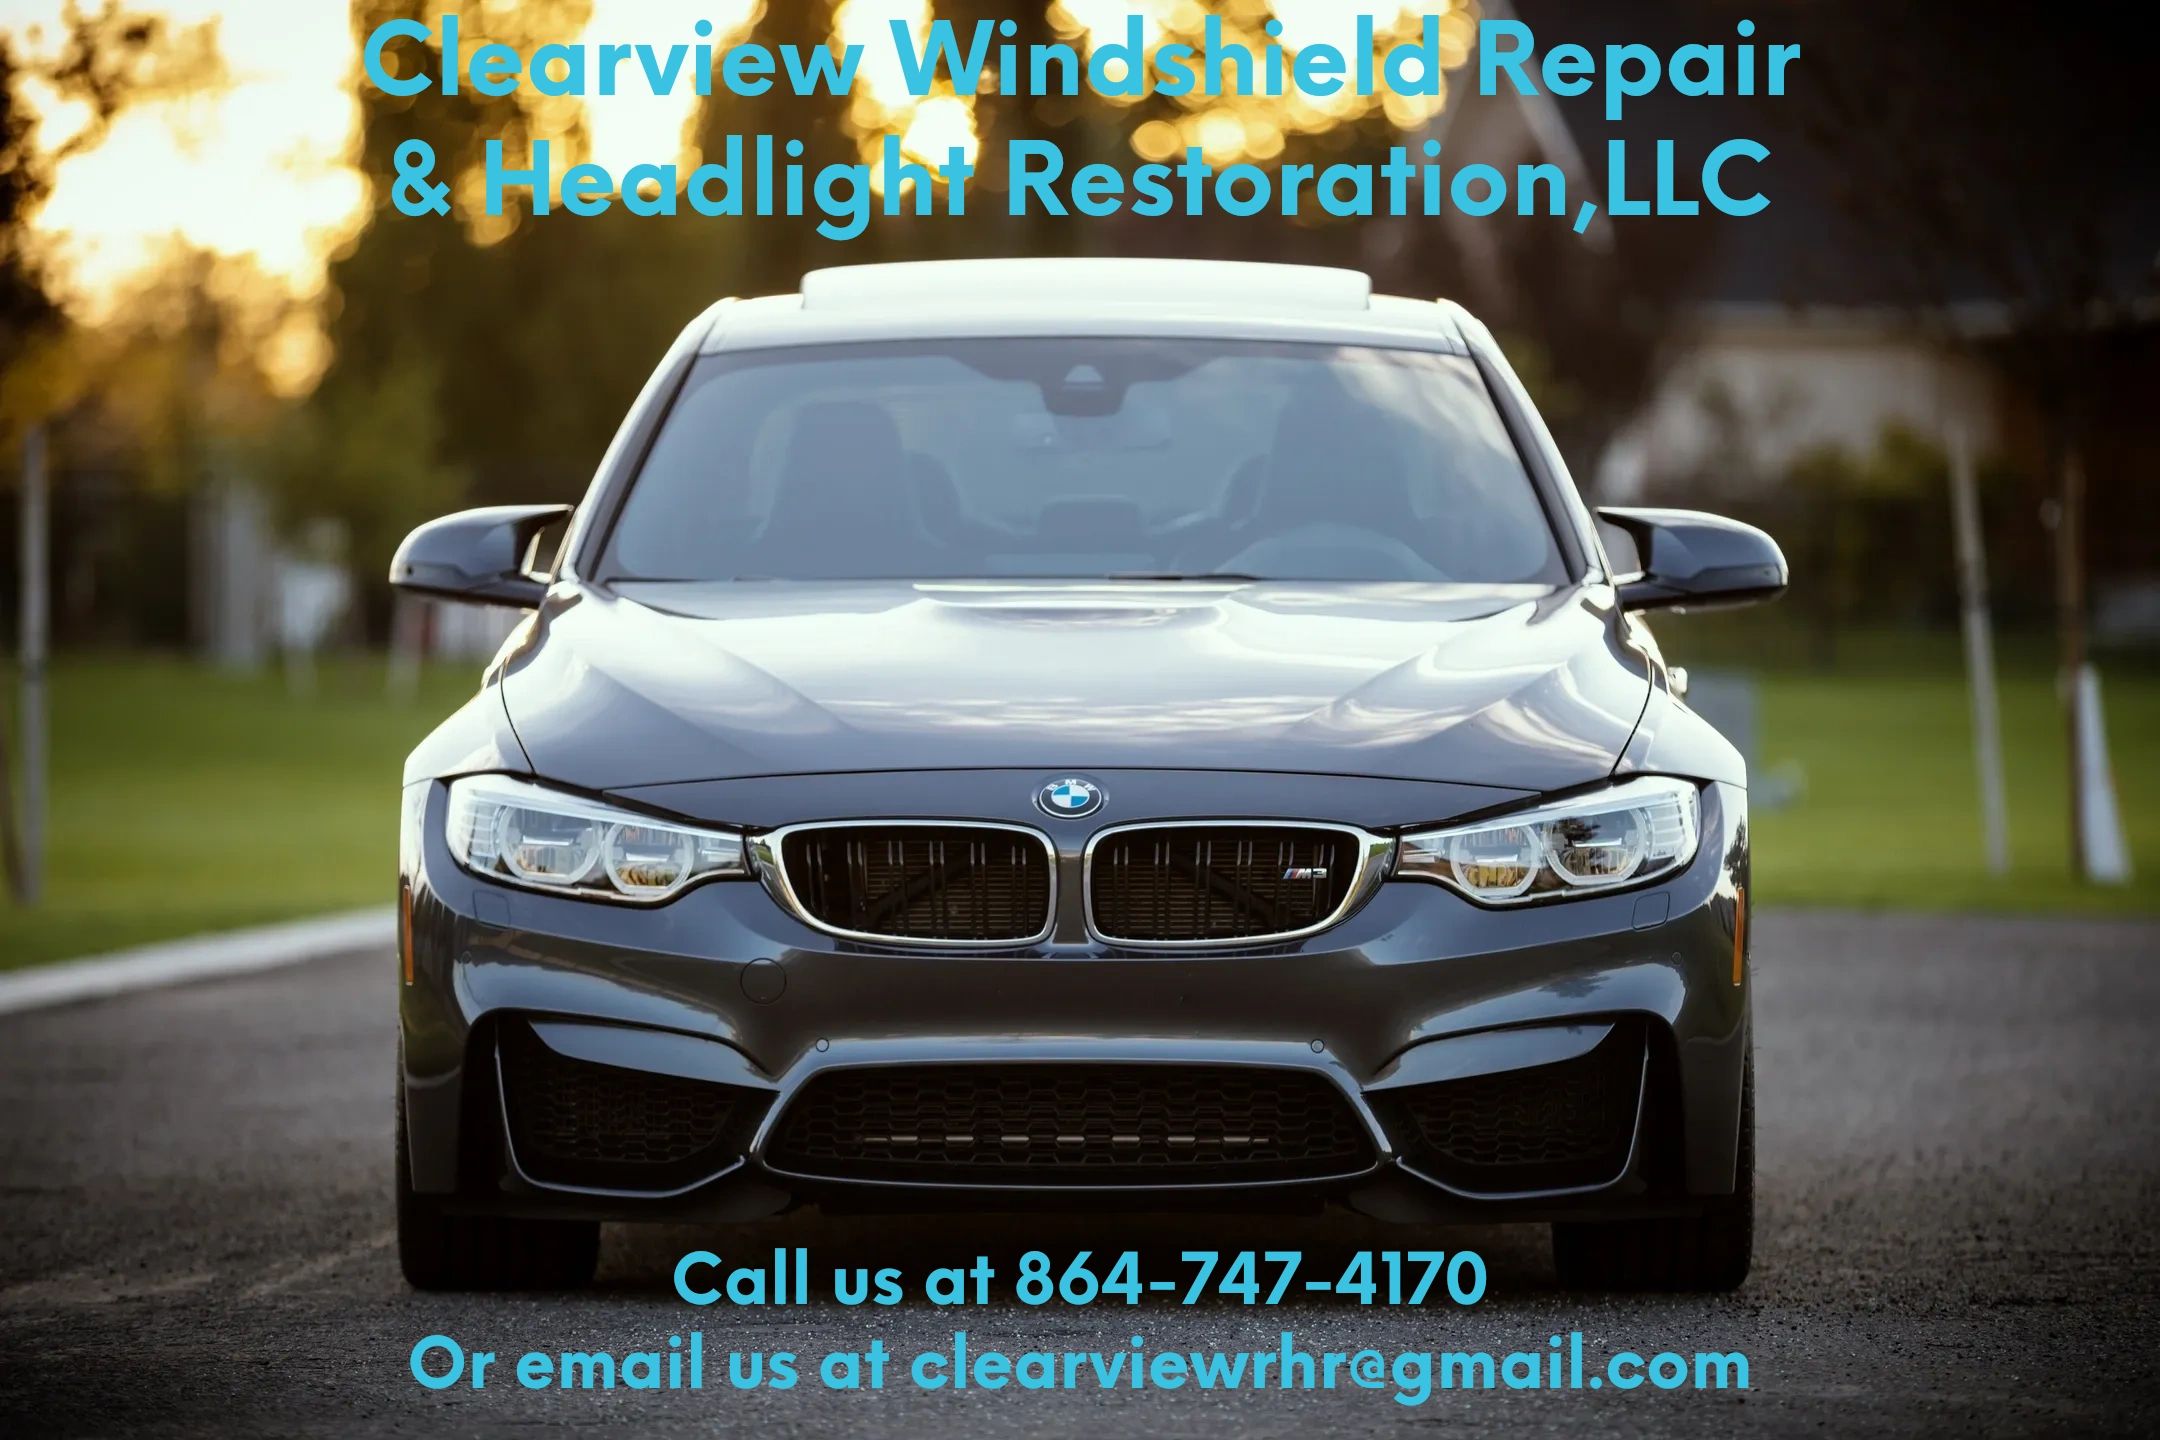 Call us at 864-747-4170 
or email us at clearviewrhr@gmail.com
